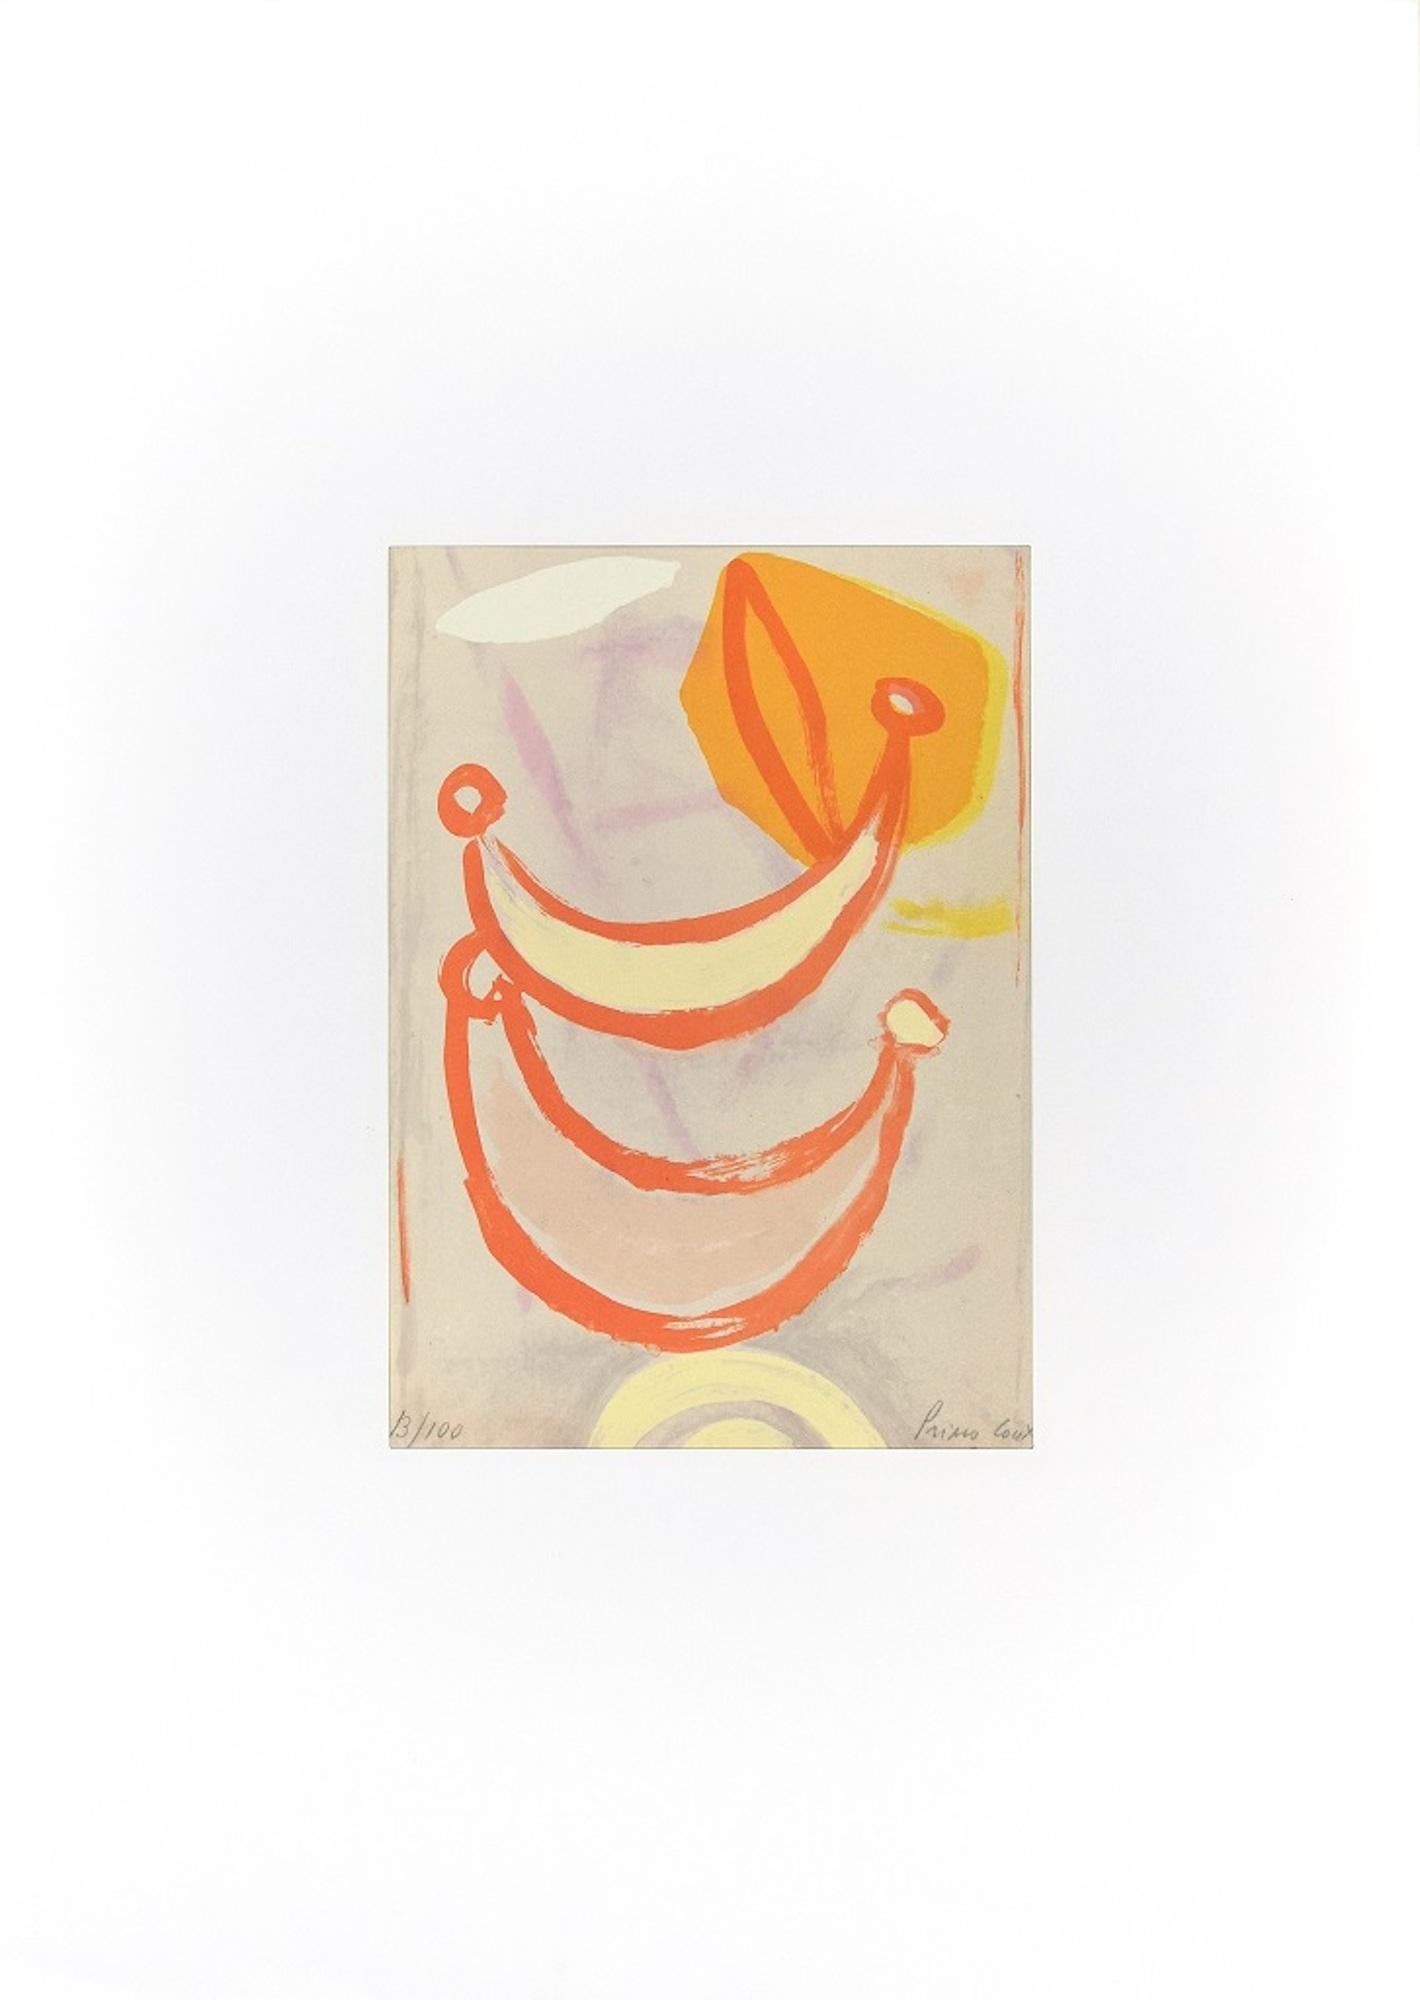 Untitled is an original colored lithograph on cream-colored paper realized by the Italian artist Primo Conti (1900-1988).

A beautiful original print, representing an abstract colorful composition is hand-signed and numbered in pencil by the artist